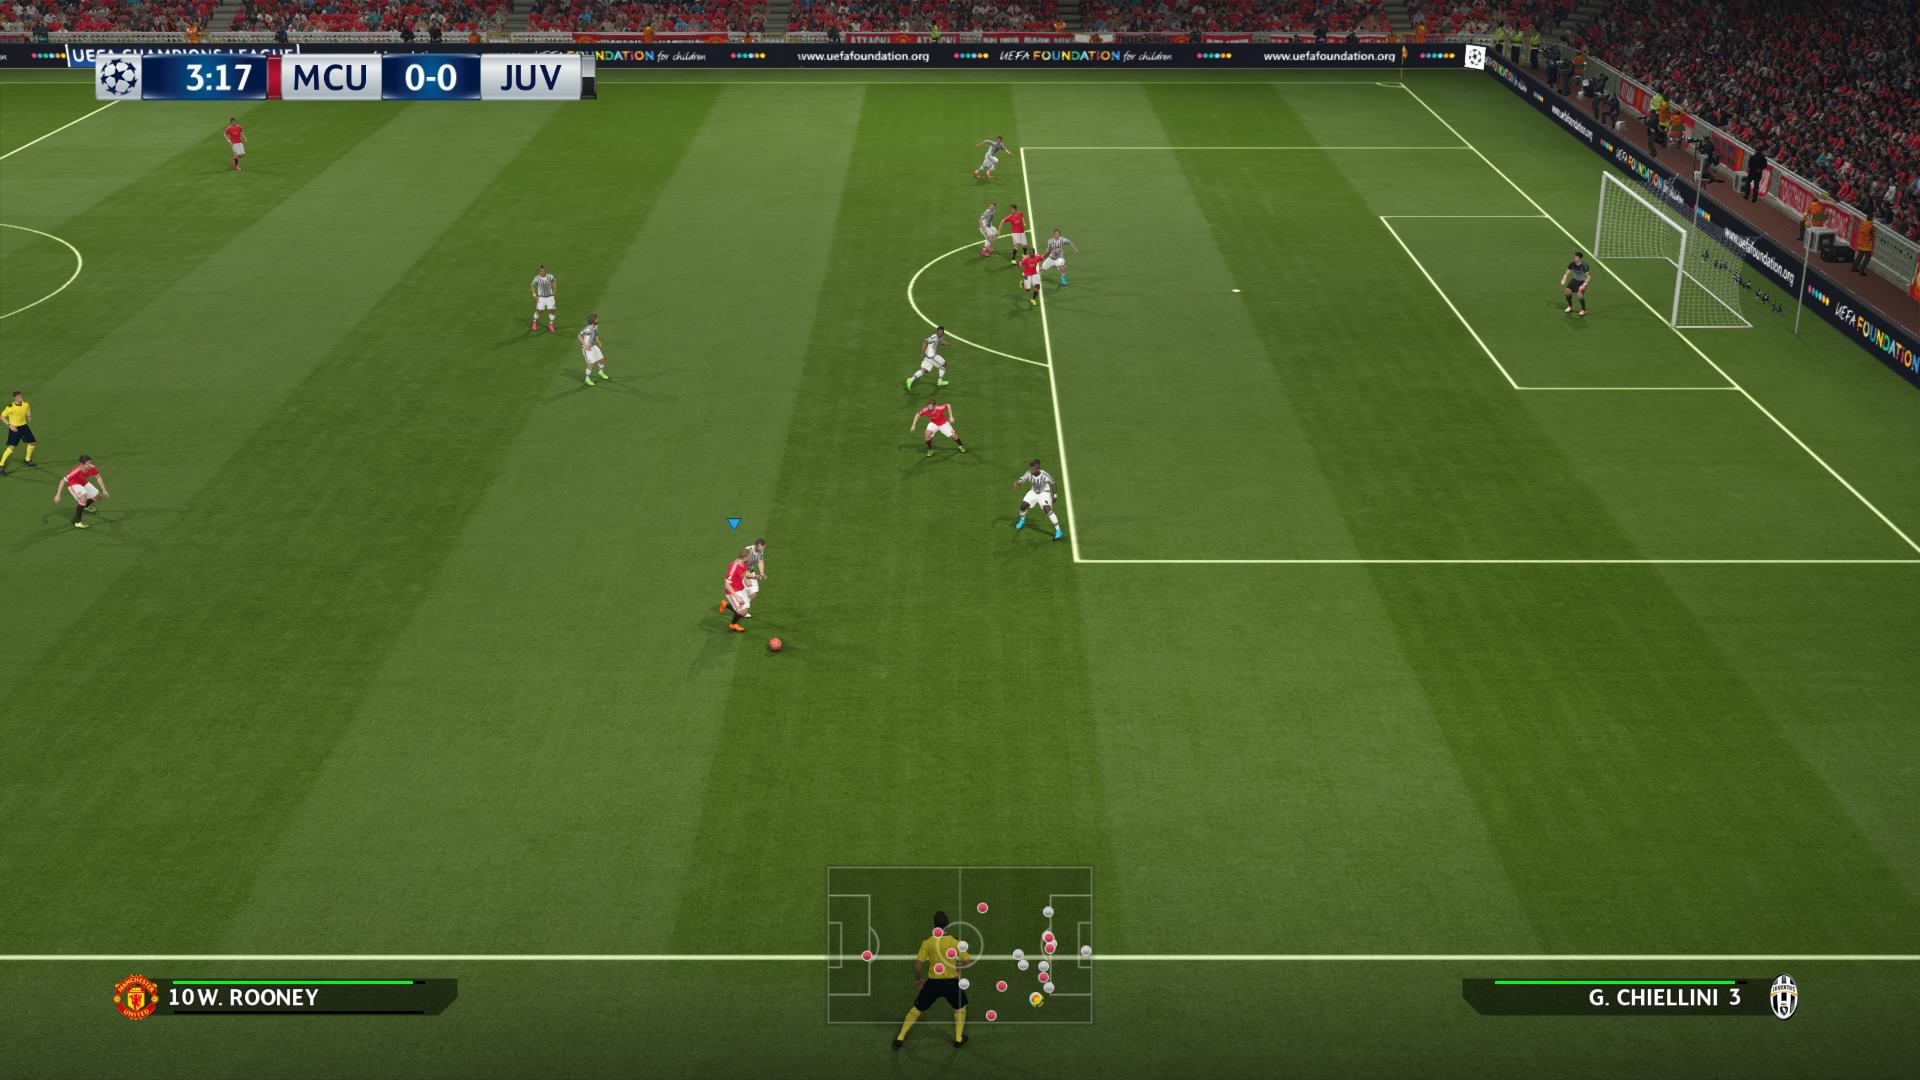 download pes 2010 full version for pc highly compressed